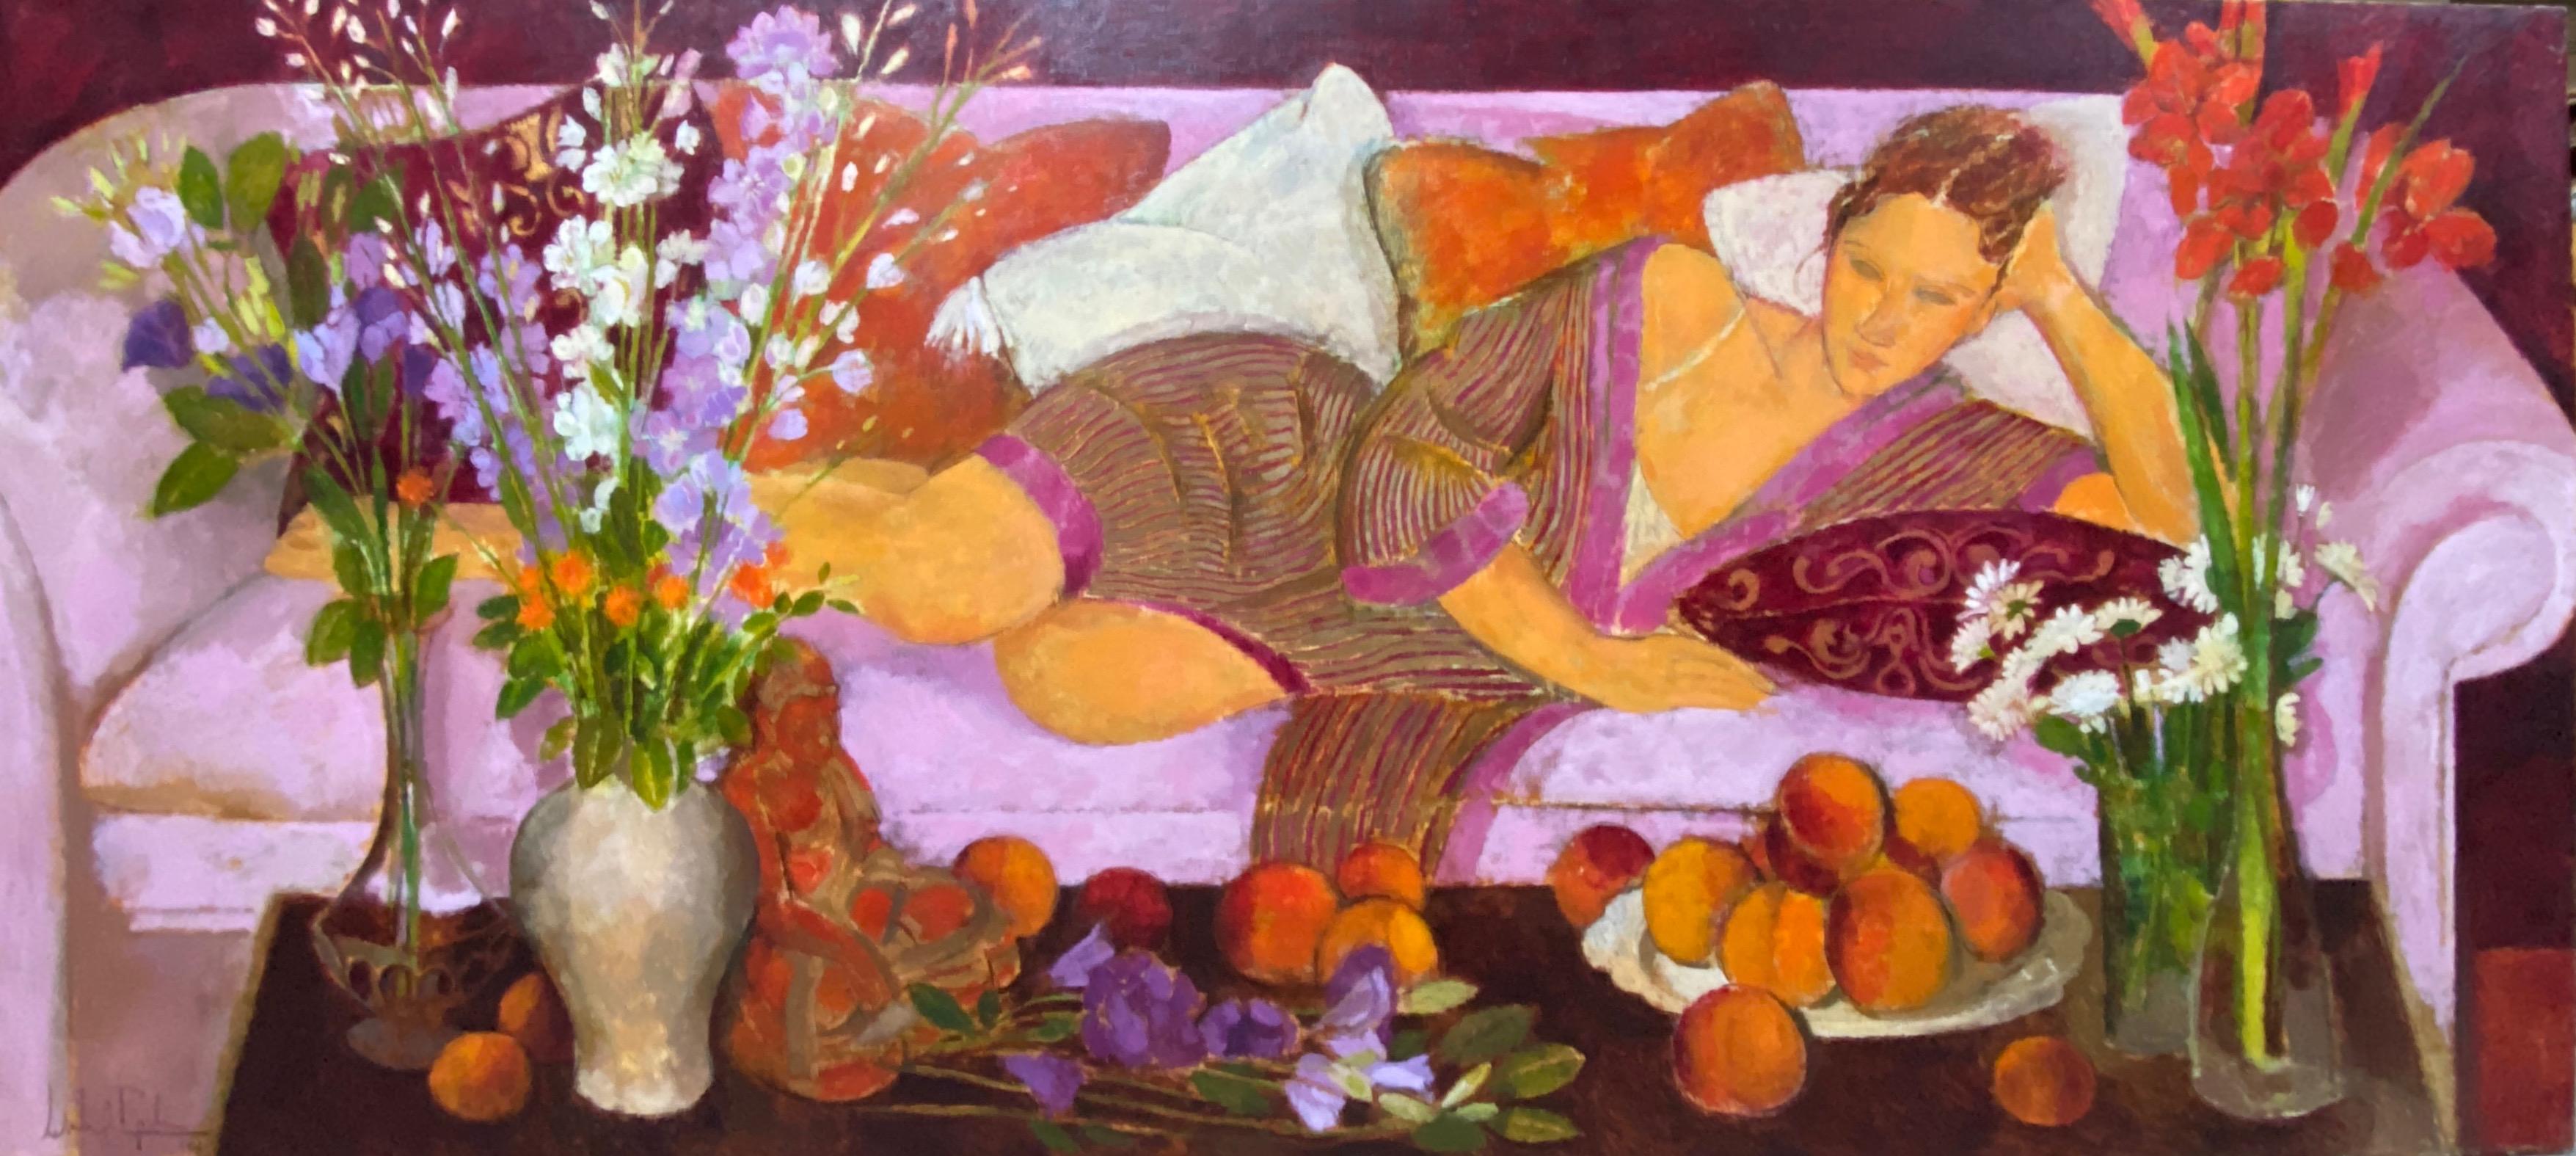 Raquel. Large format interior with woman portrait and still-life